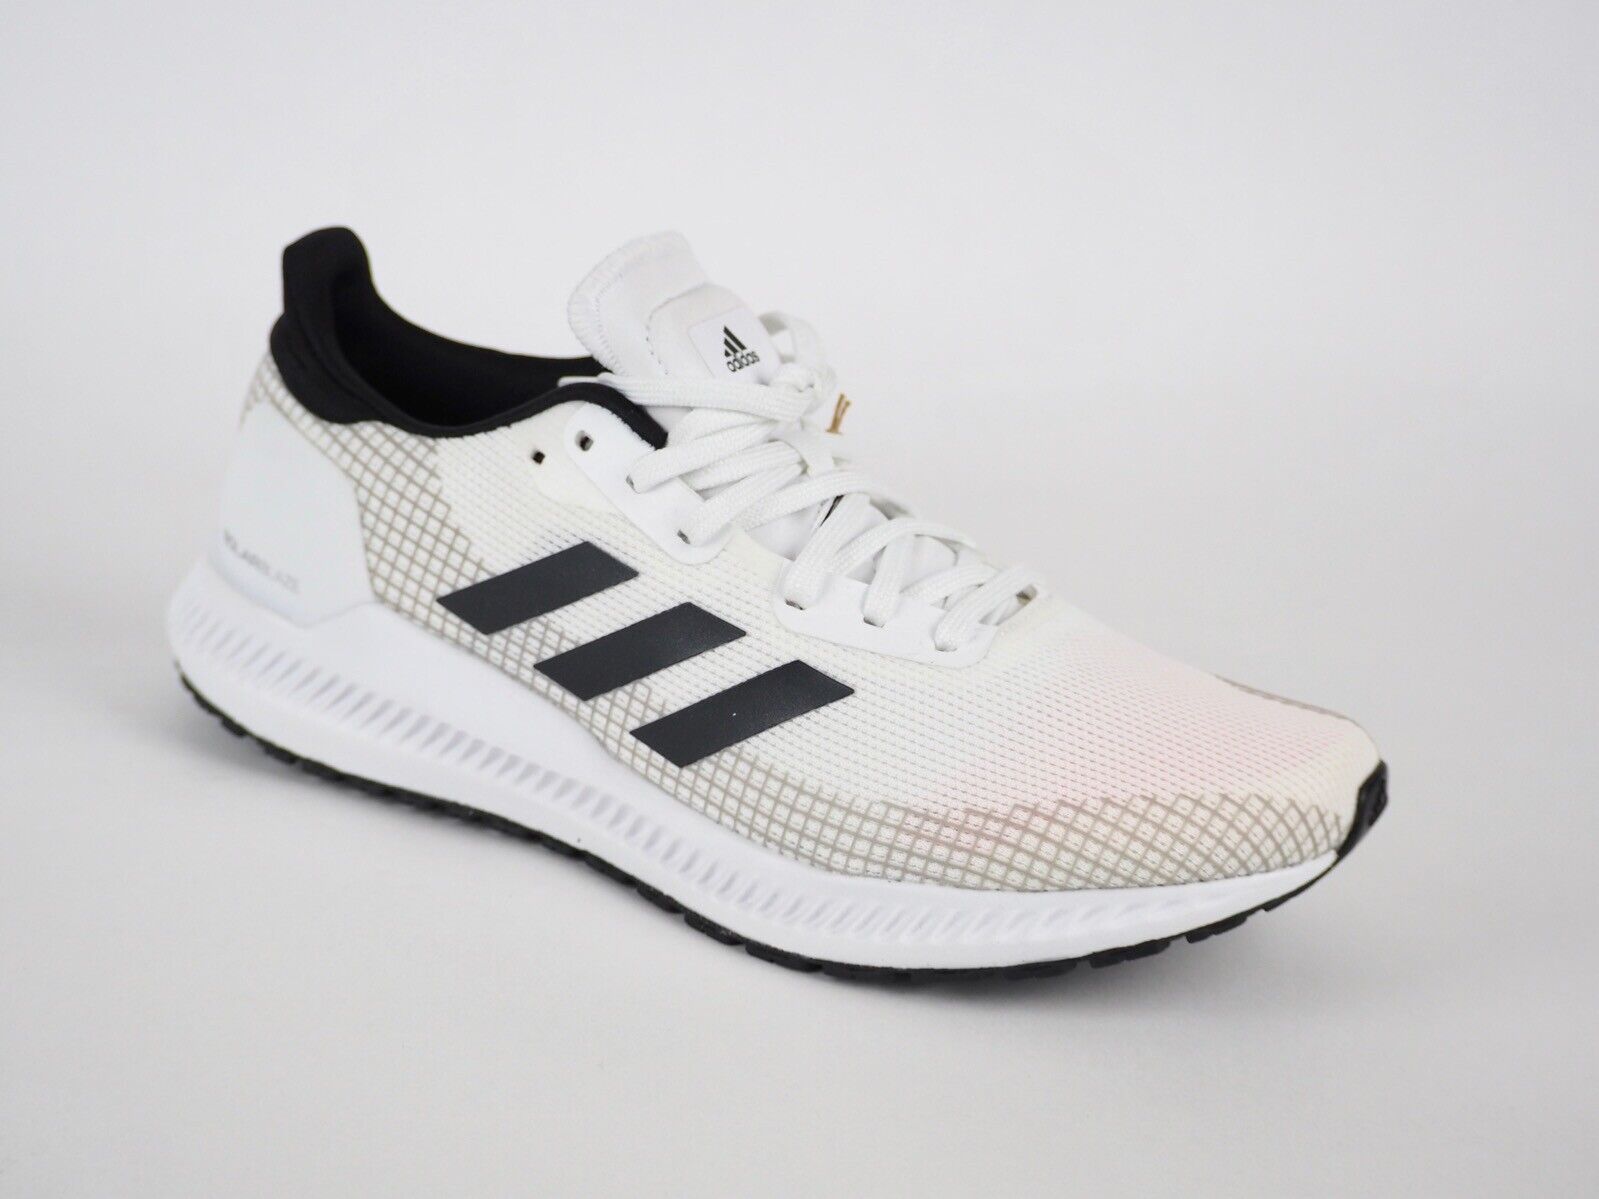 Mens ADIDAS Solar Blaze EF0810 Black / White Running Shoes Casual Trainers